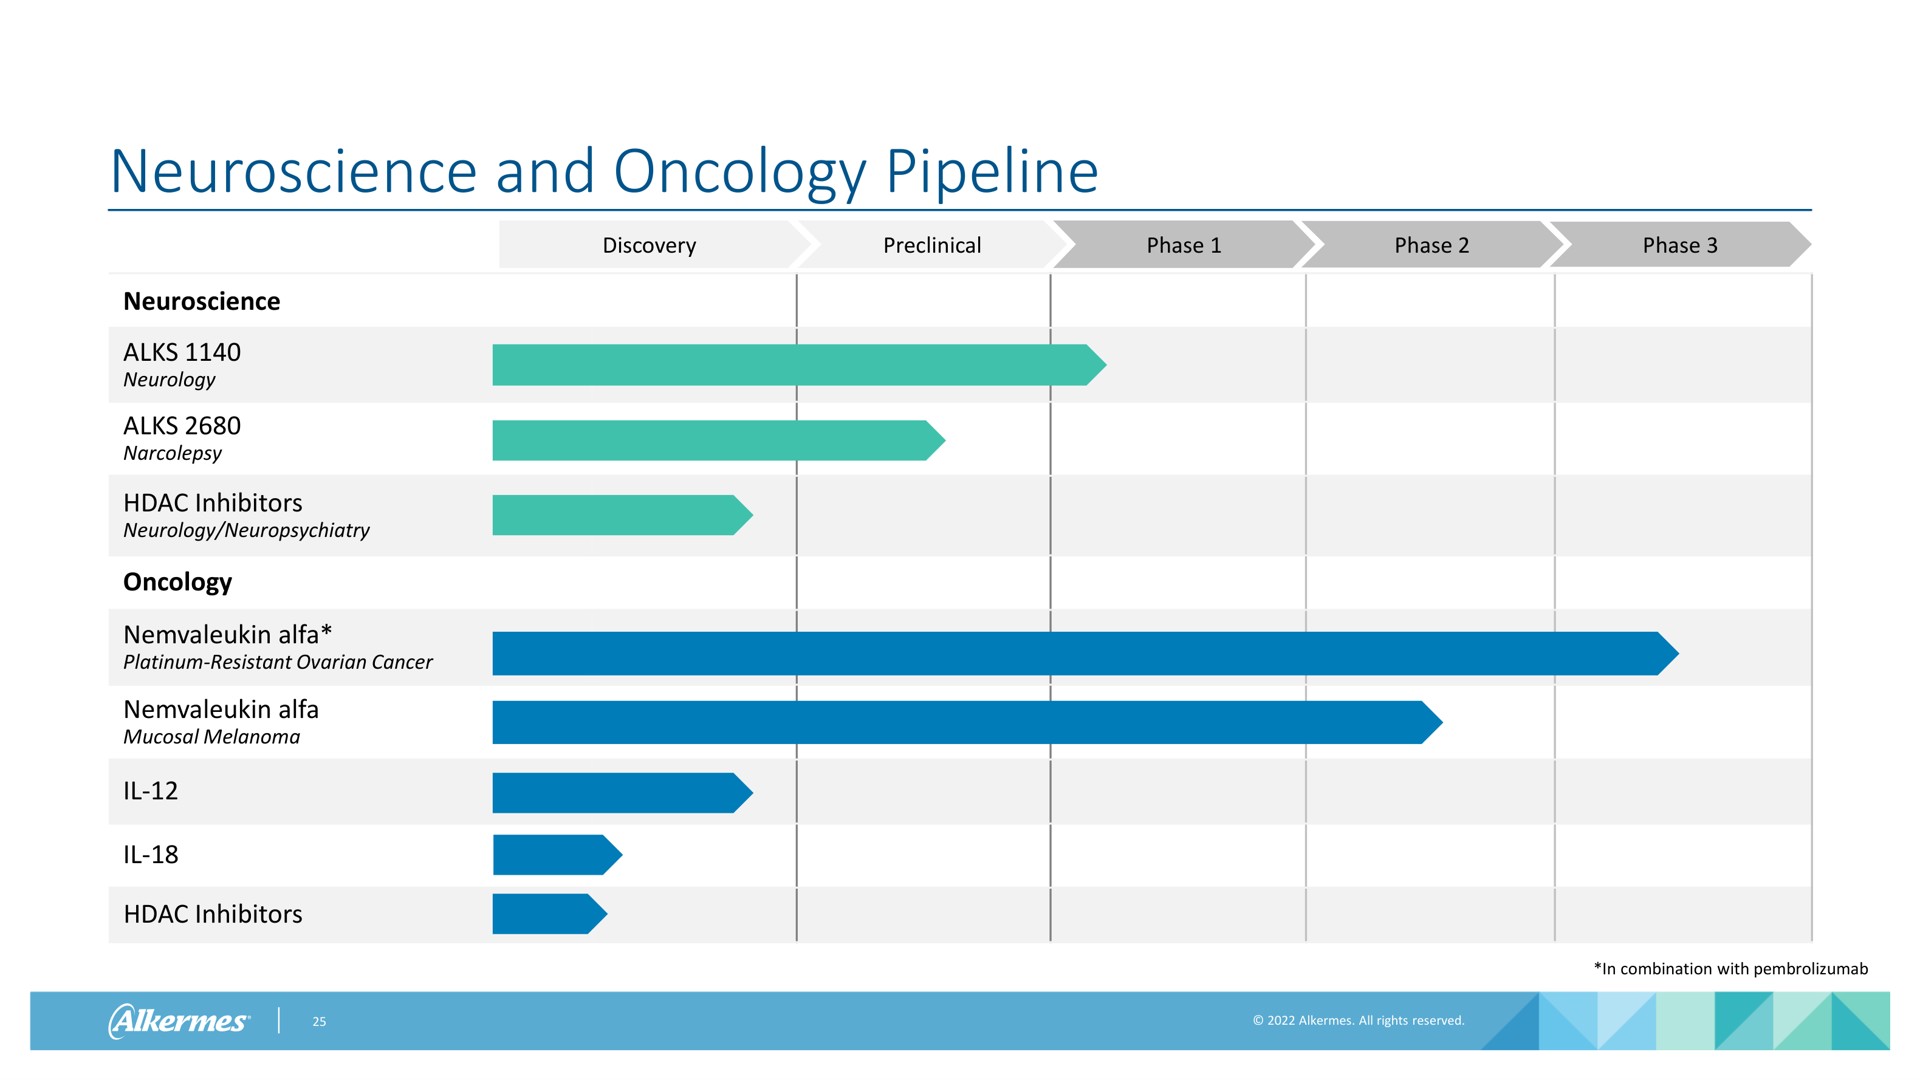 and oncology pipeline | Alkermes